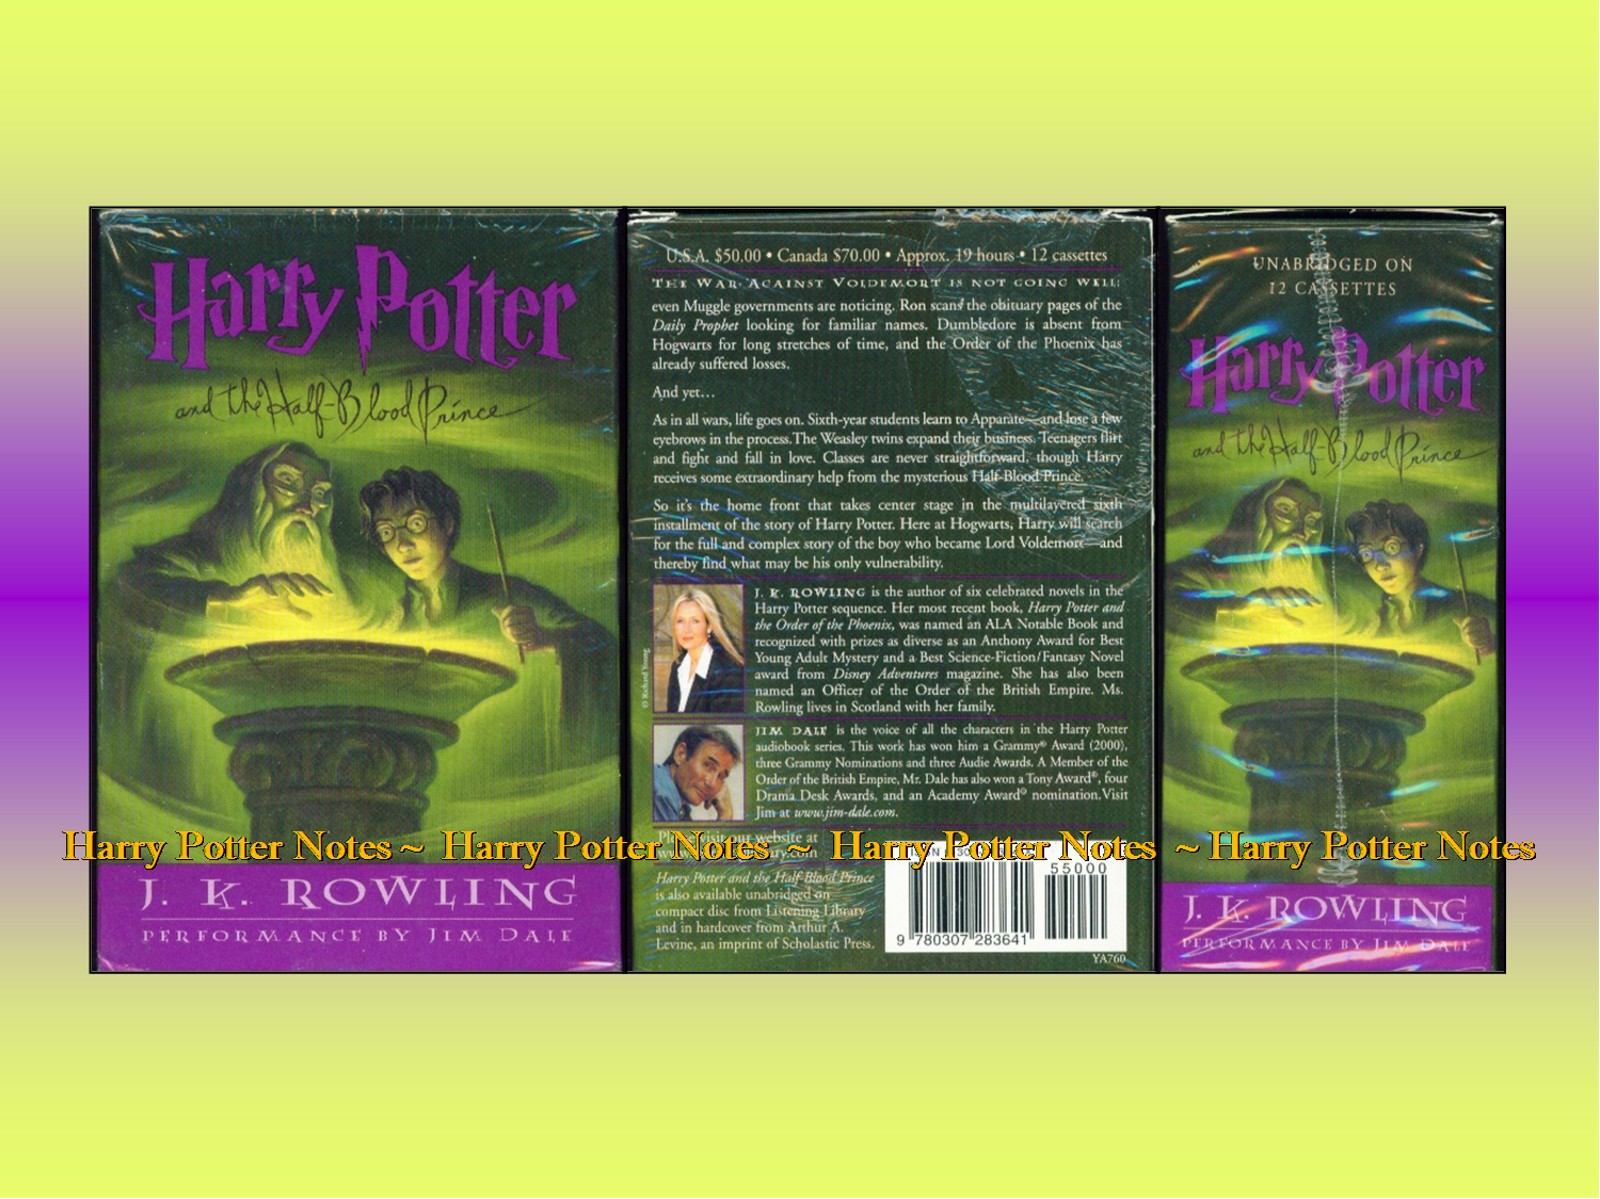 How can I access the table of contents in the Harry Potter audiobooks? 2